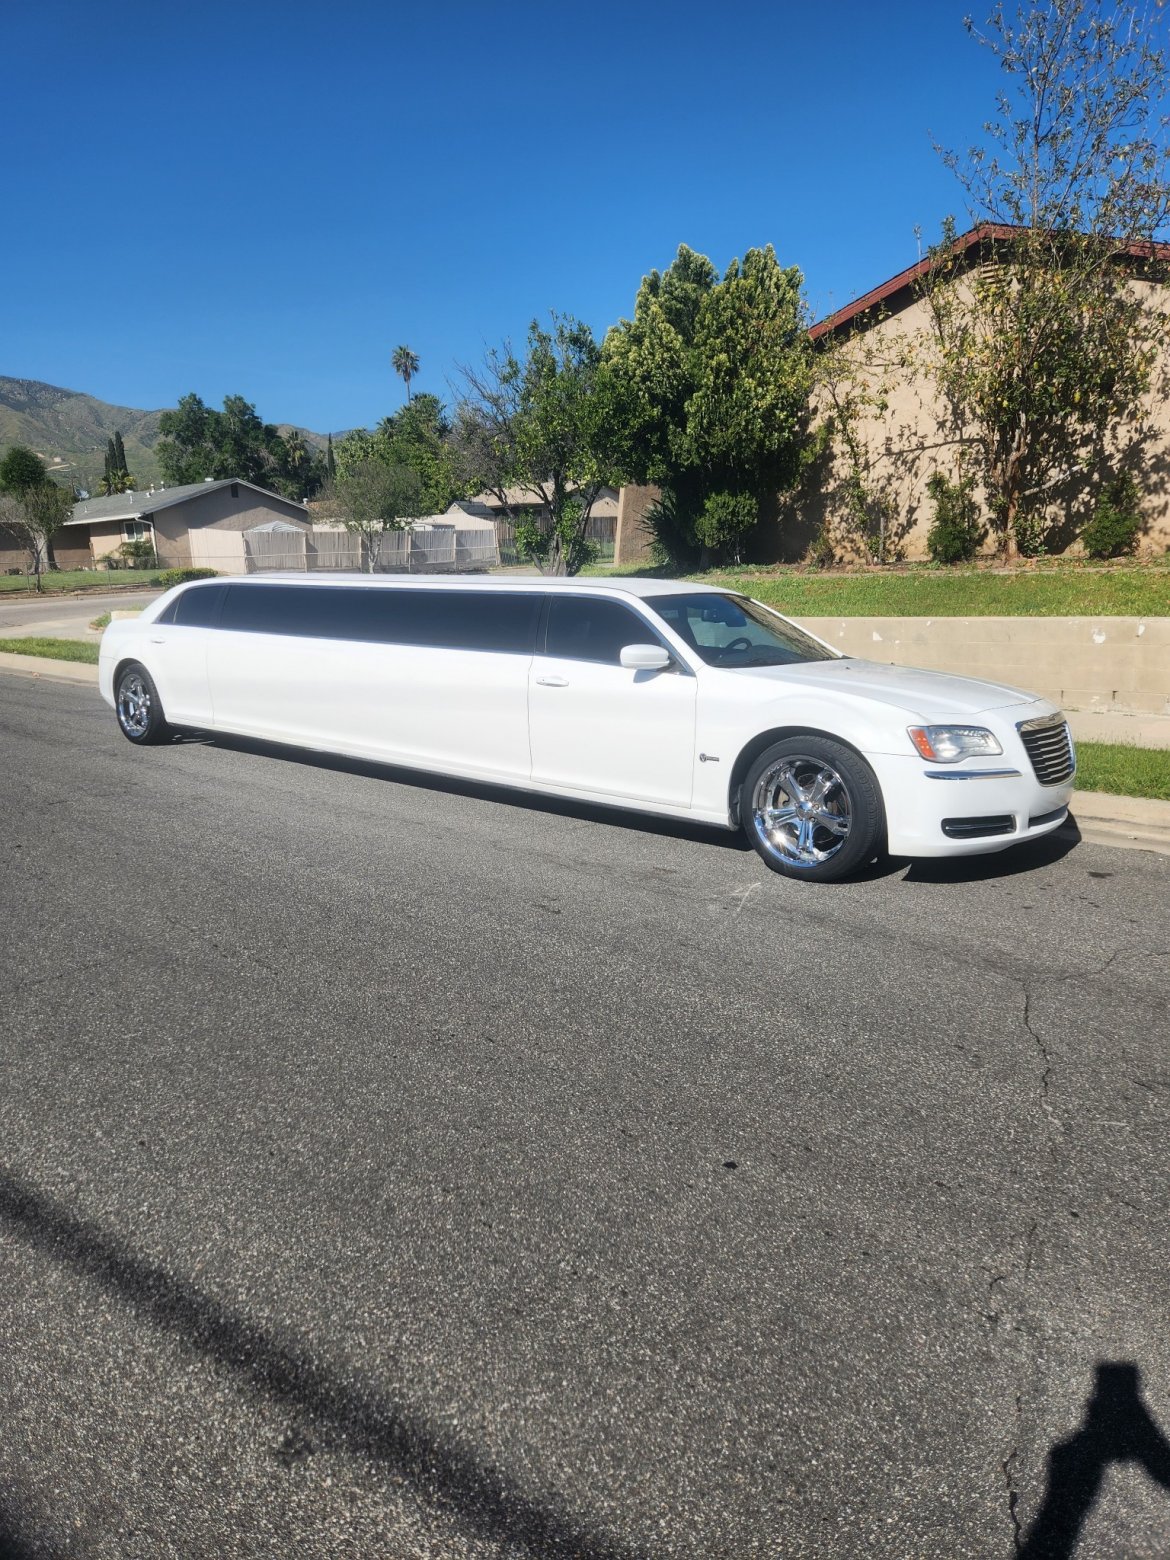 Limousine for sale: 2012 Chrysler 300 140&quot; by S.P.V.